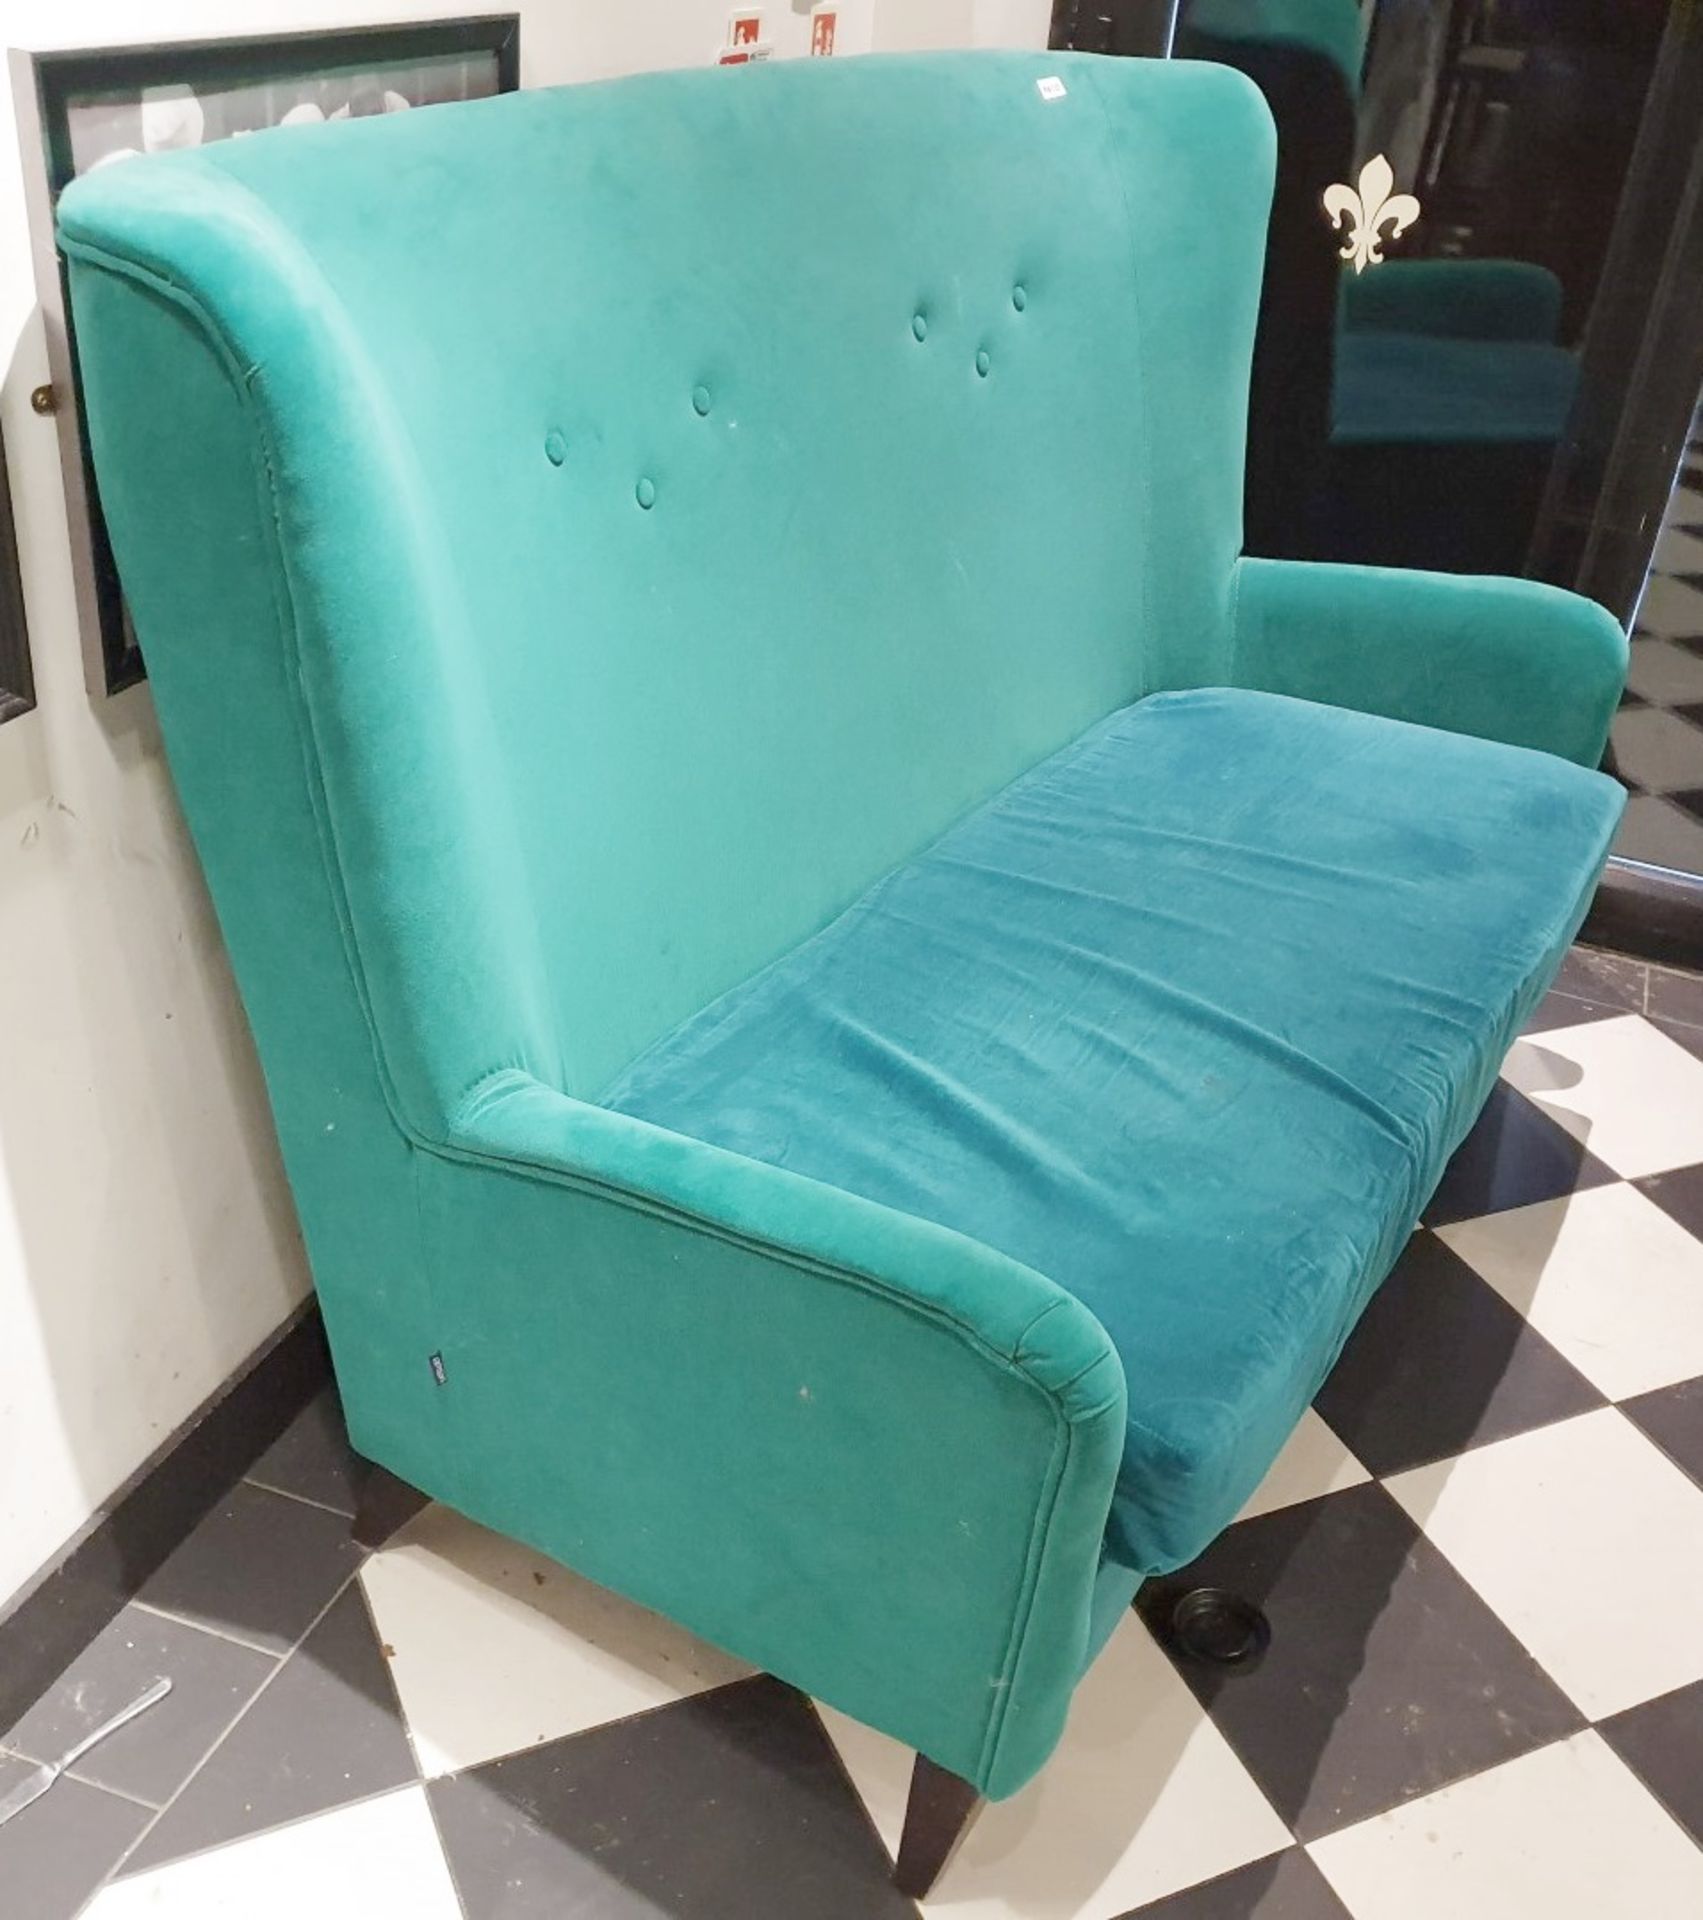 1 x Satelliet Retro 1960's Style High Back Sofa in Green - H110 x W158 x D70 cms - Ref PA133 - CL463